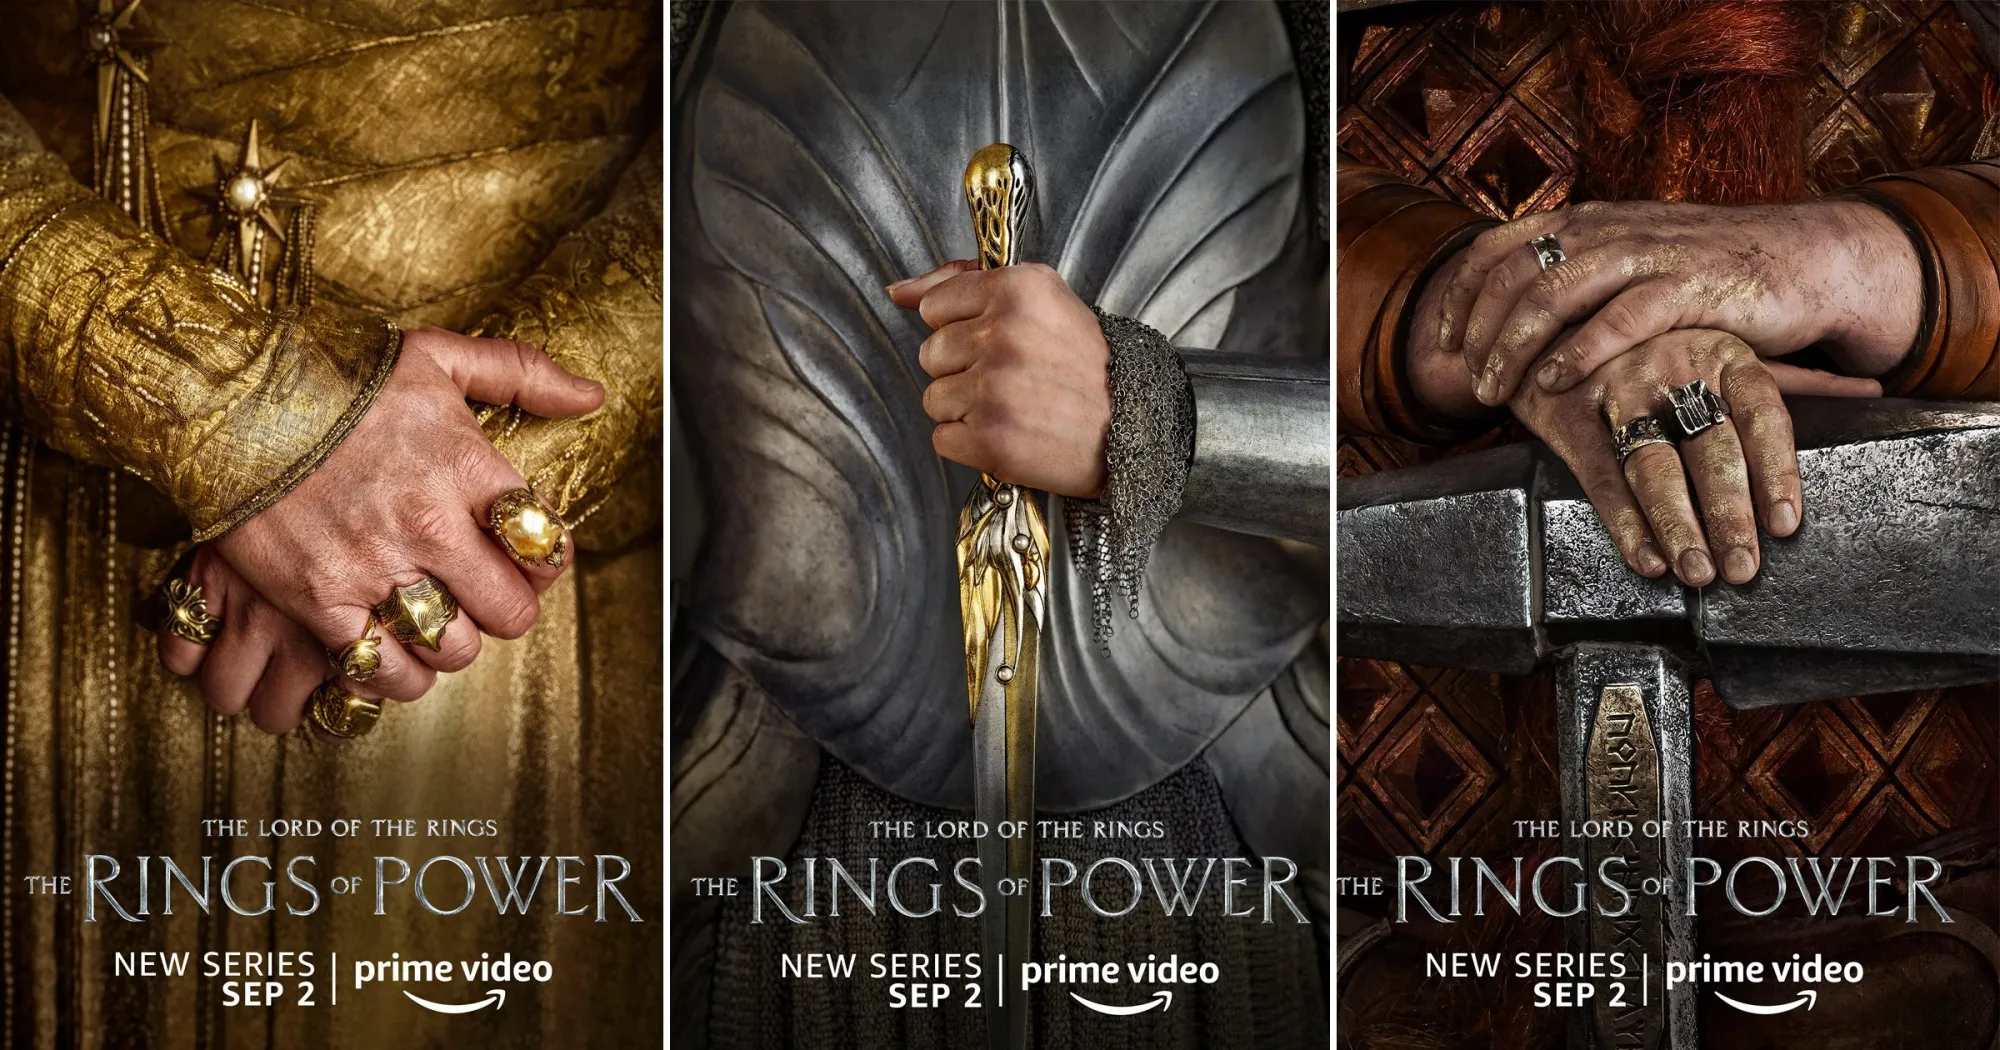 THE LORD OF THE RINGS: THE RINGS OF POWER Trailer | Amazon Prime